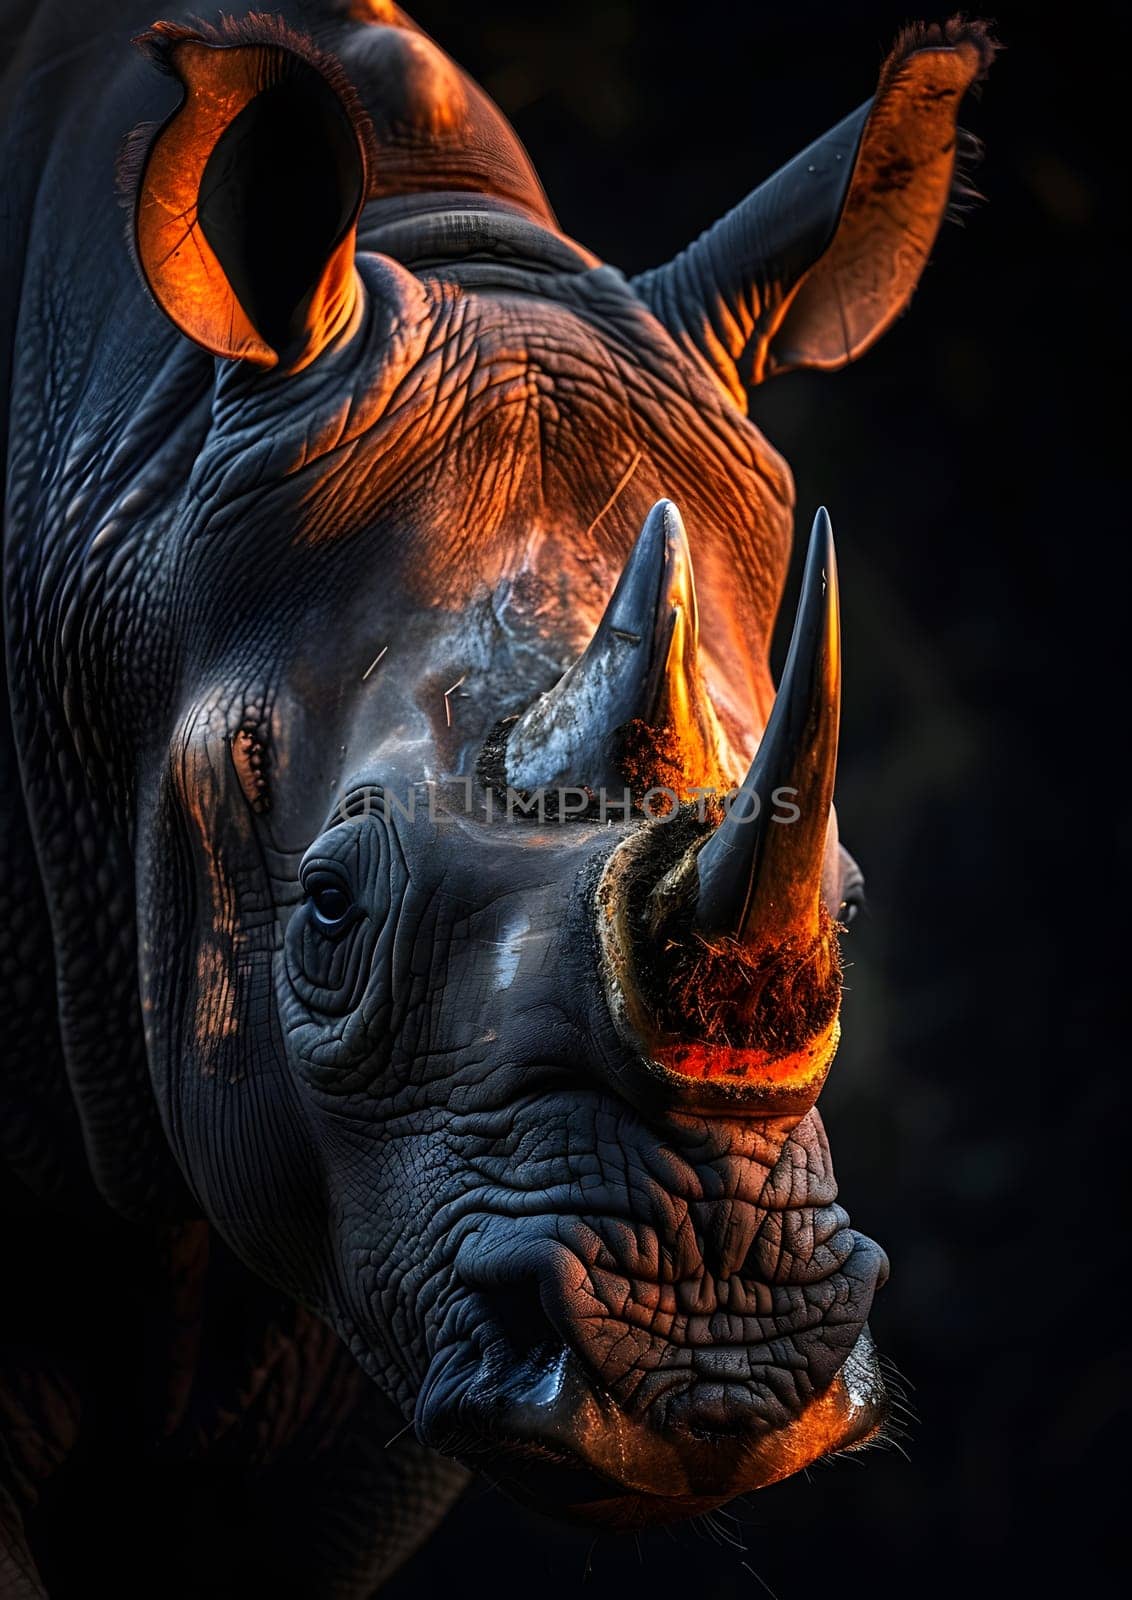 A detailed painting of a rhinoceross face captures its textured jawline, wrinkled snout, and majestic horn in electric blue hues against a dark background